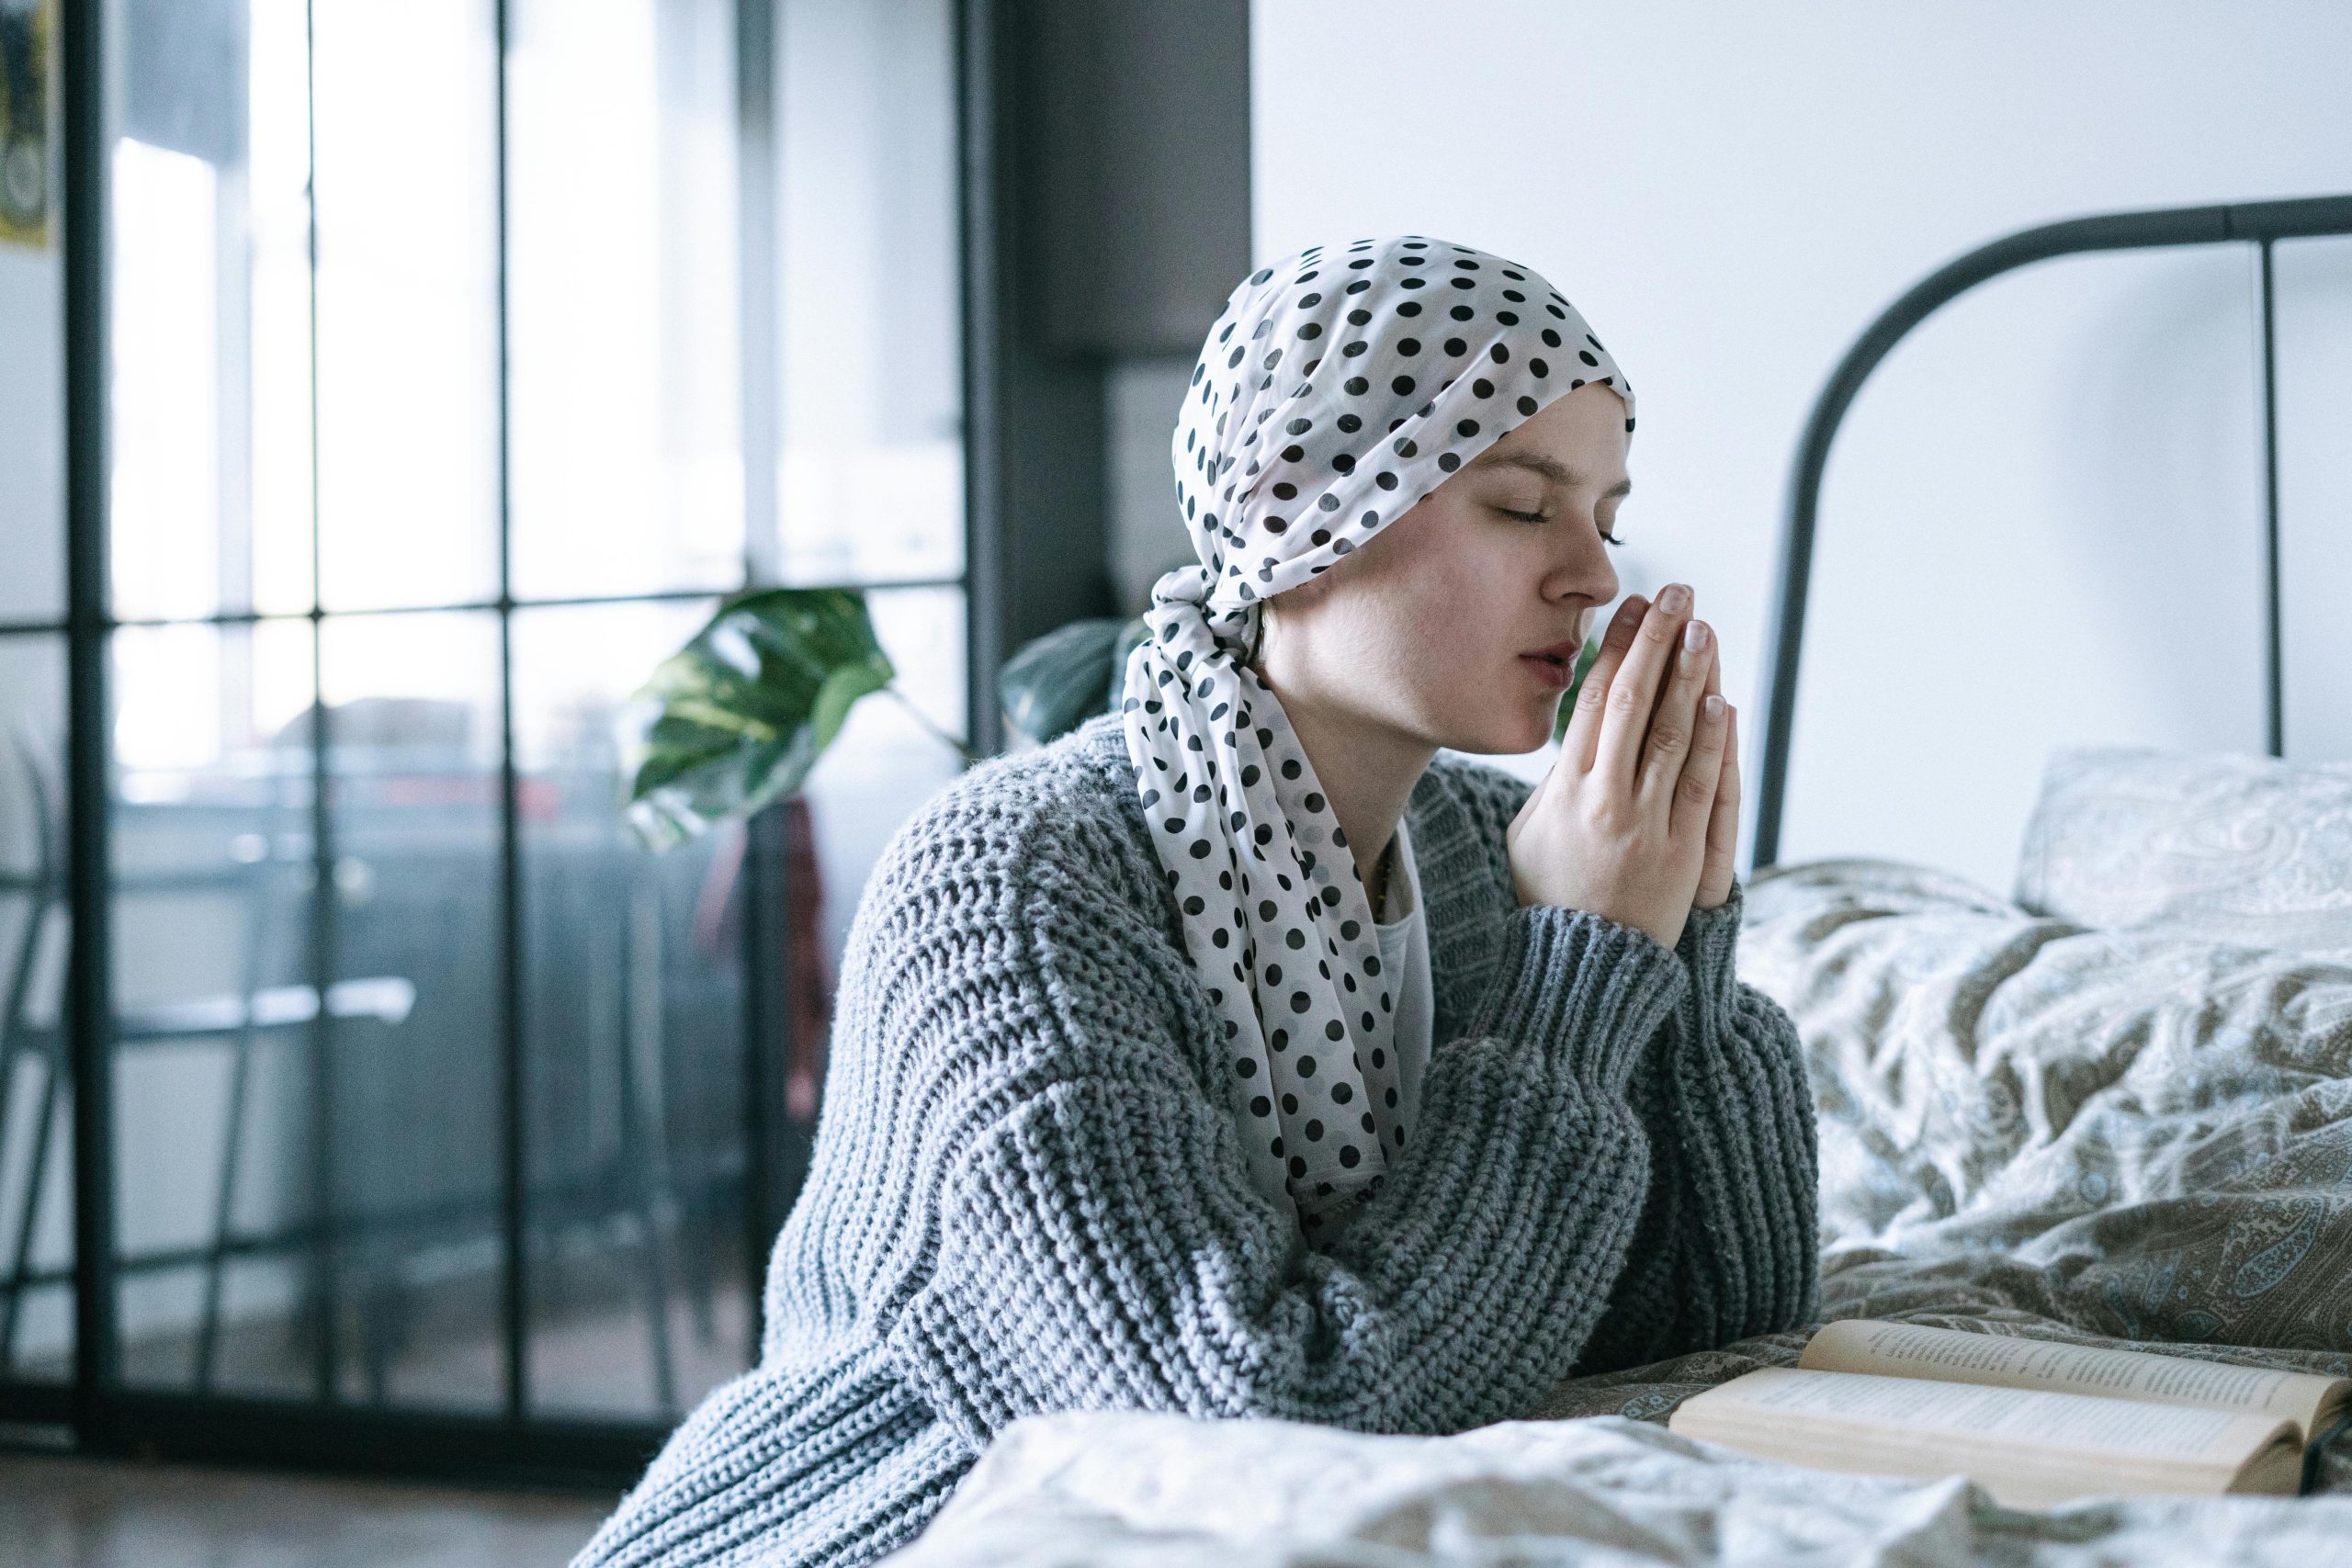 15 WAYS TO HELP YOU BECOME MORE PRAYERFUL